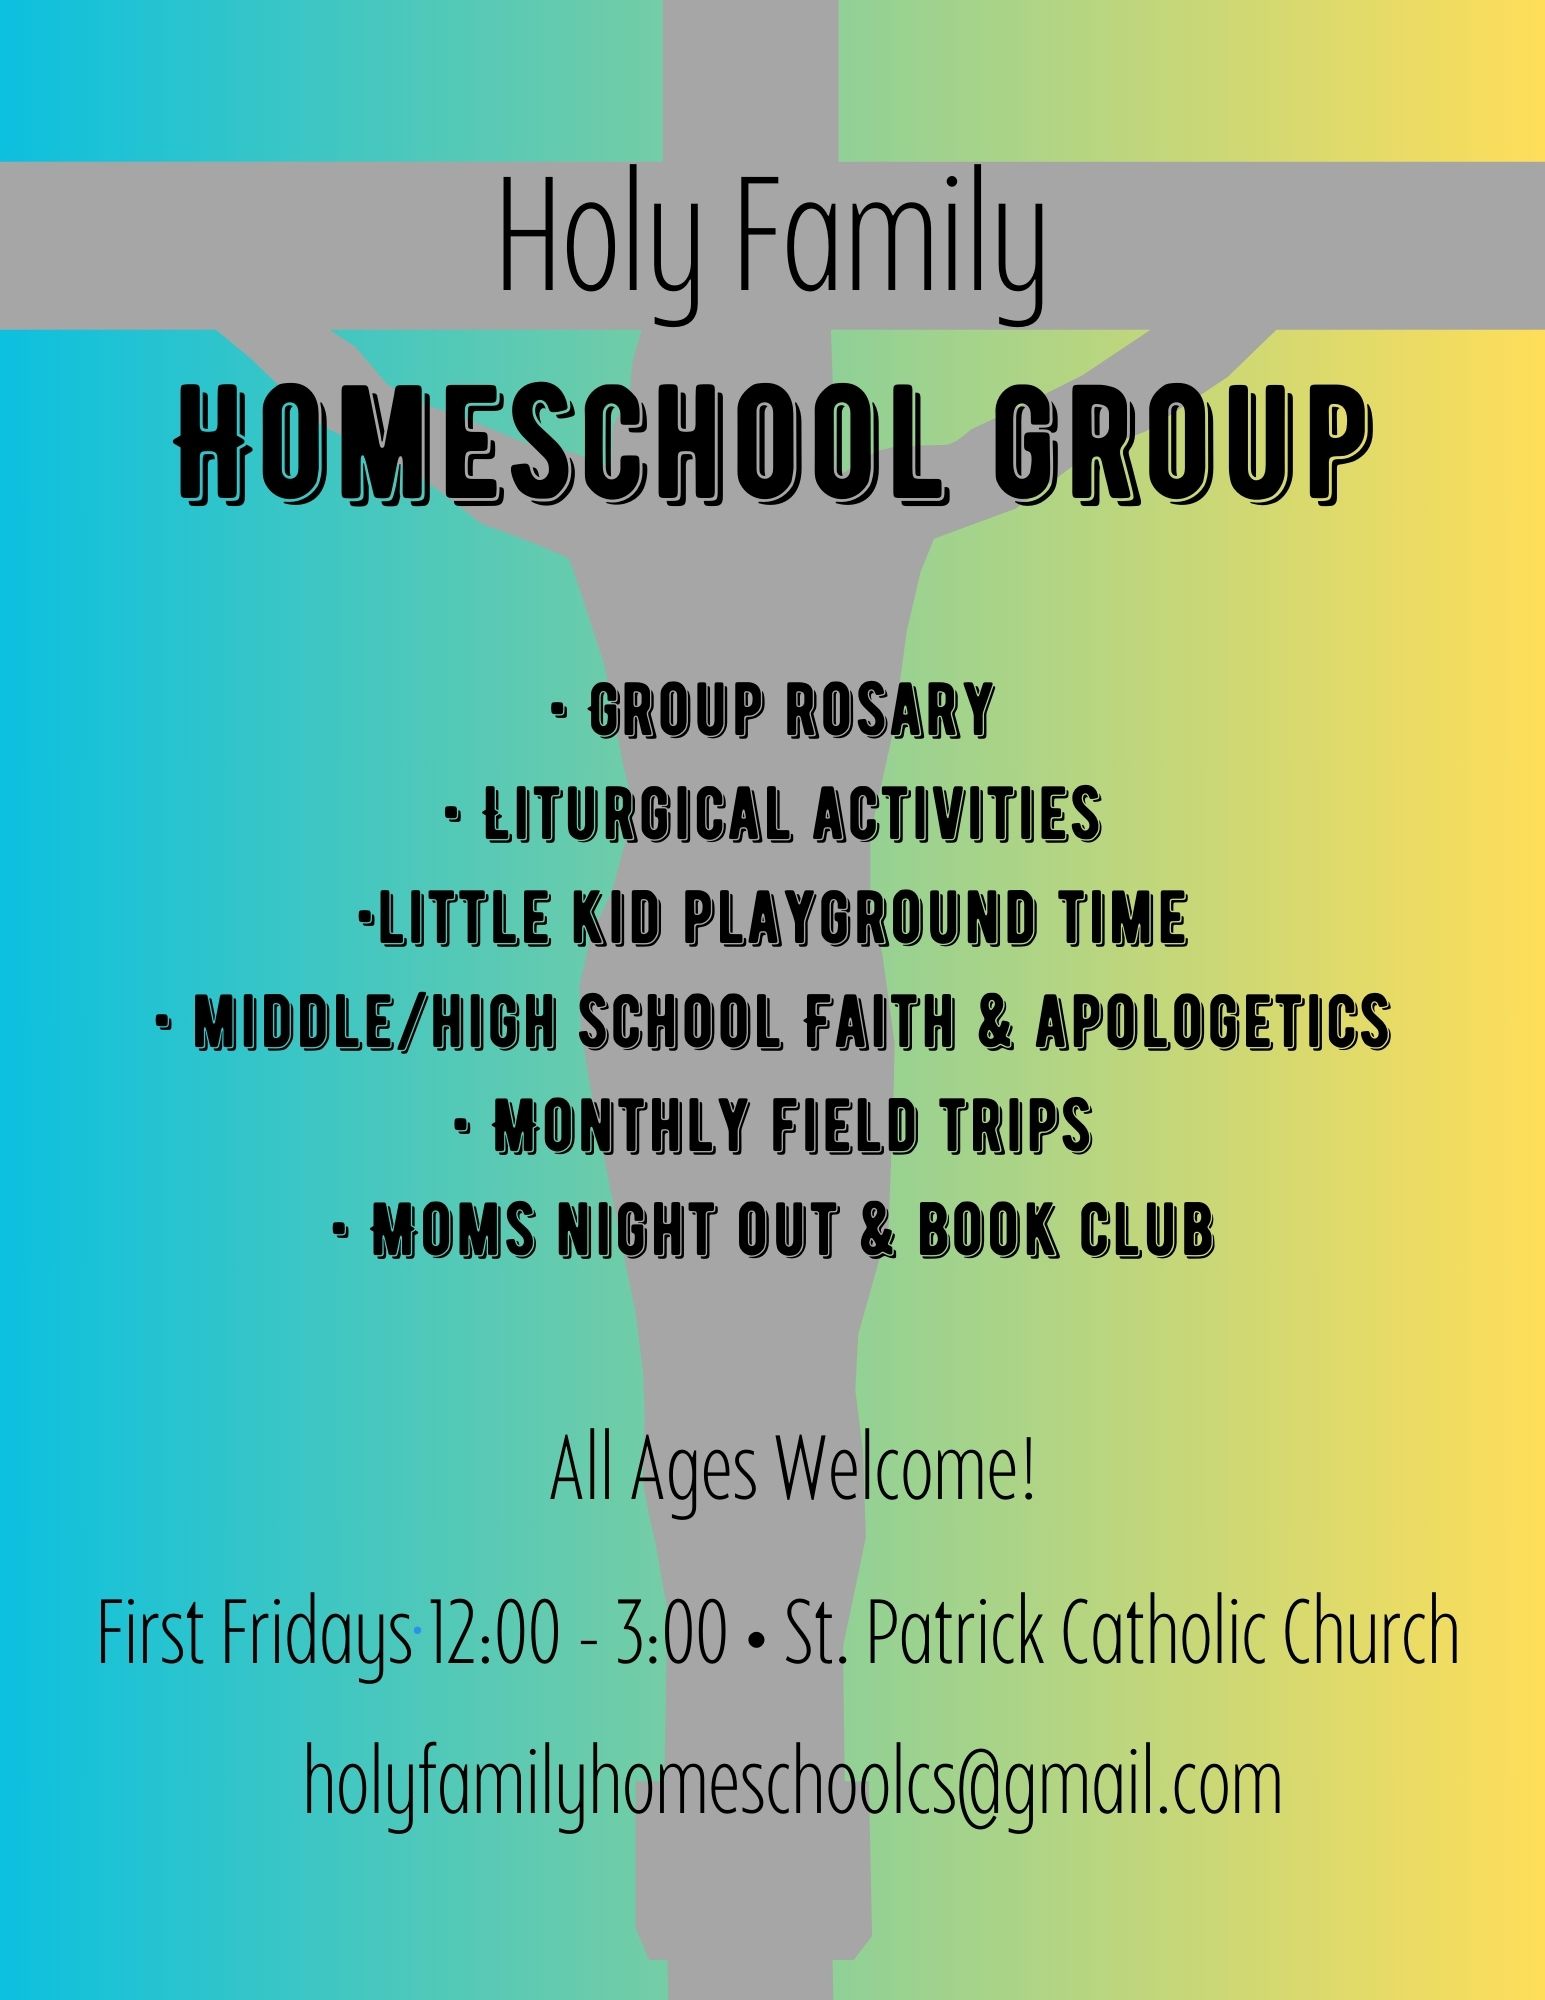 Holy Family Homeschool Group at St. Patrick's